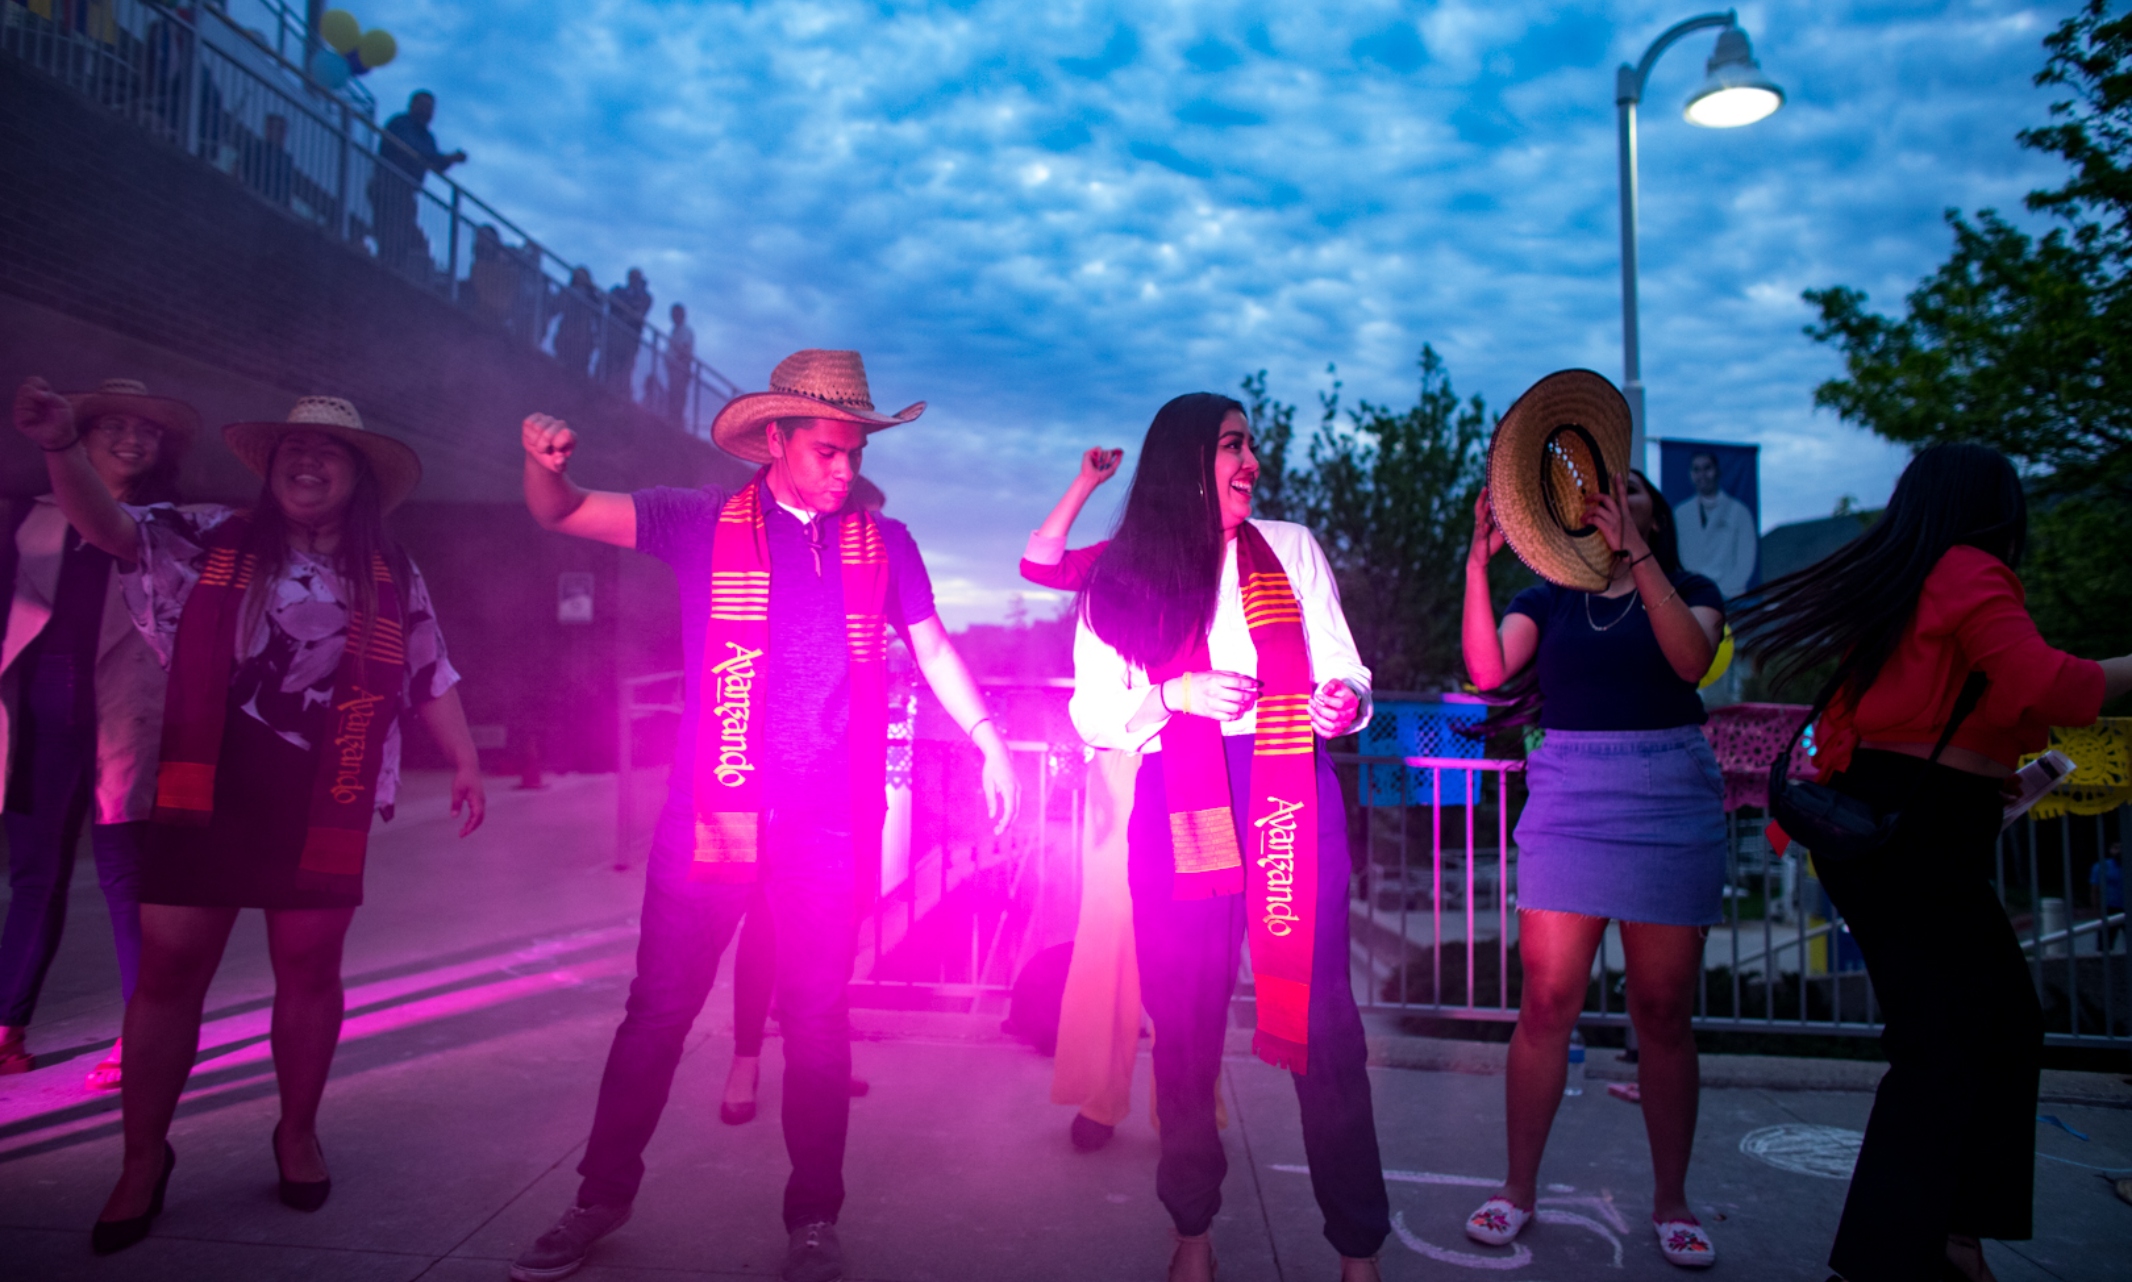 dance party at night during the 2019 end of year celebration for Avanzando